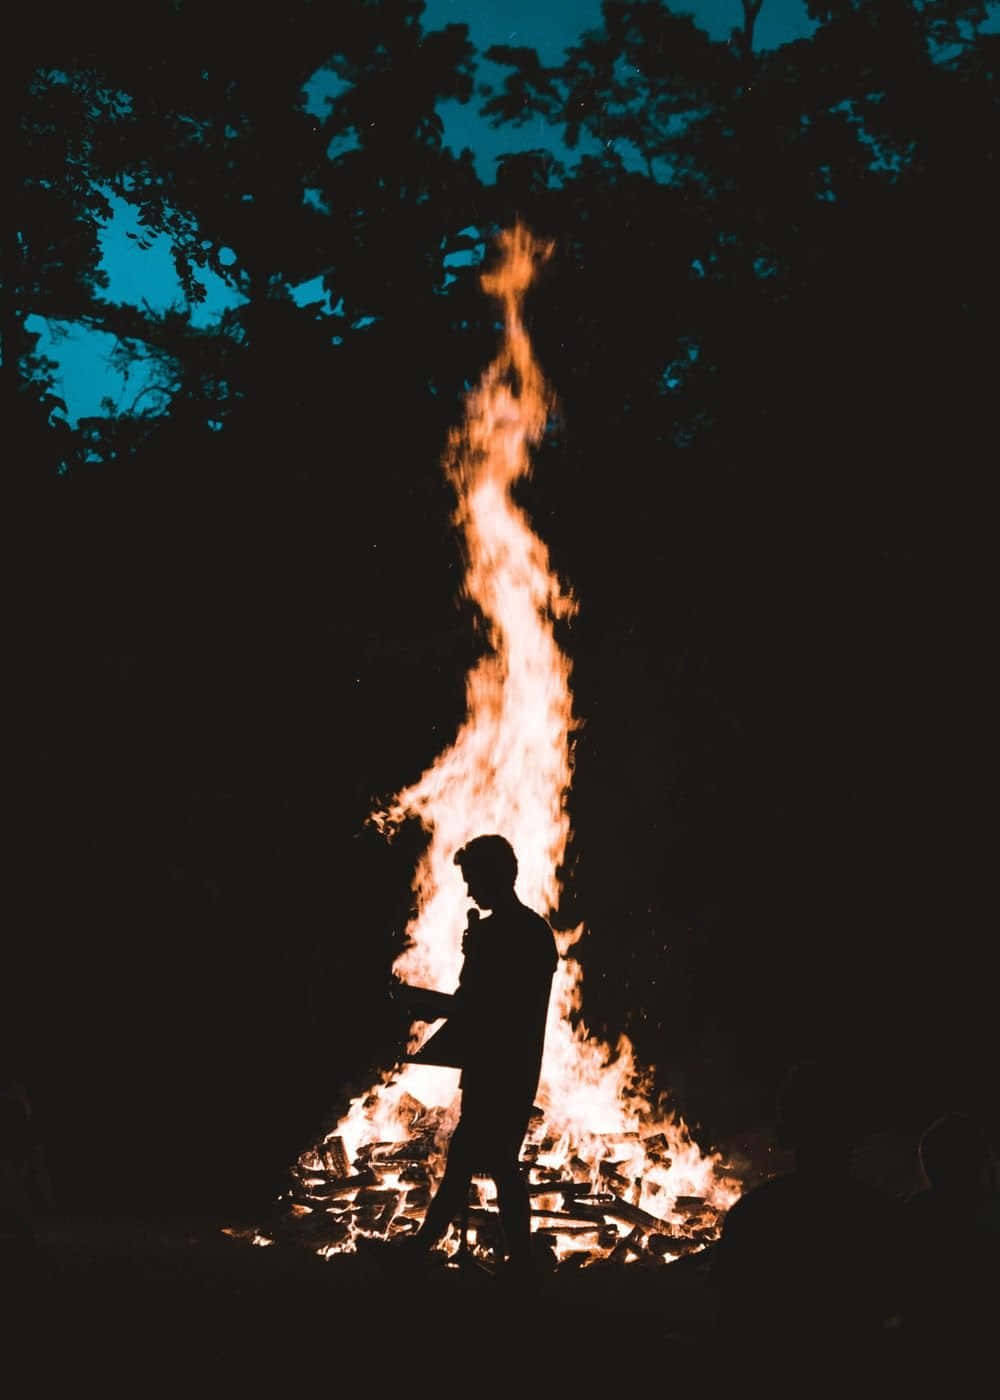 Aesthetic Man Silhouette Against The Campfire Wallpaper